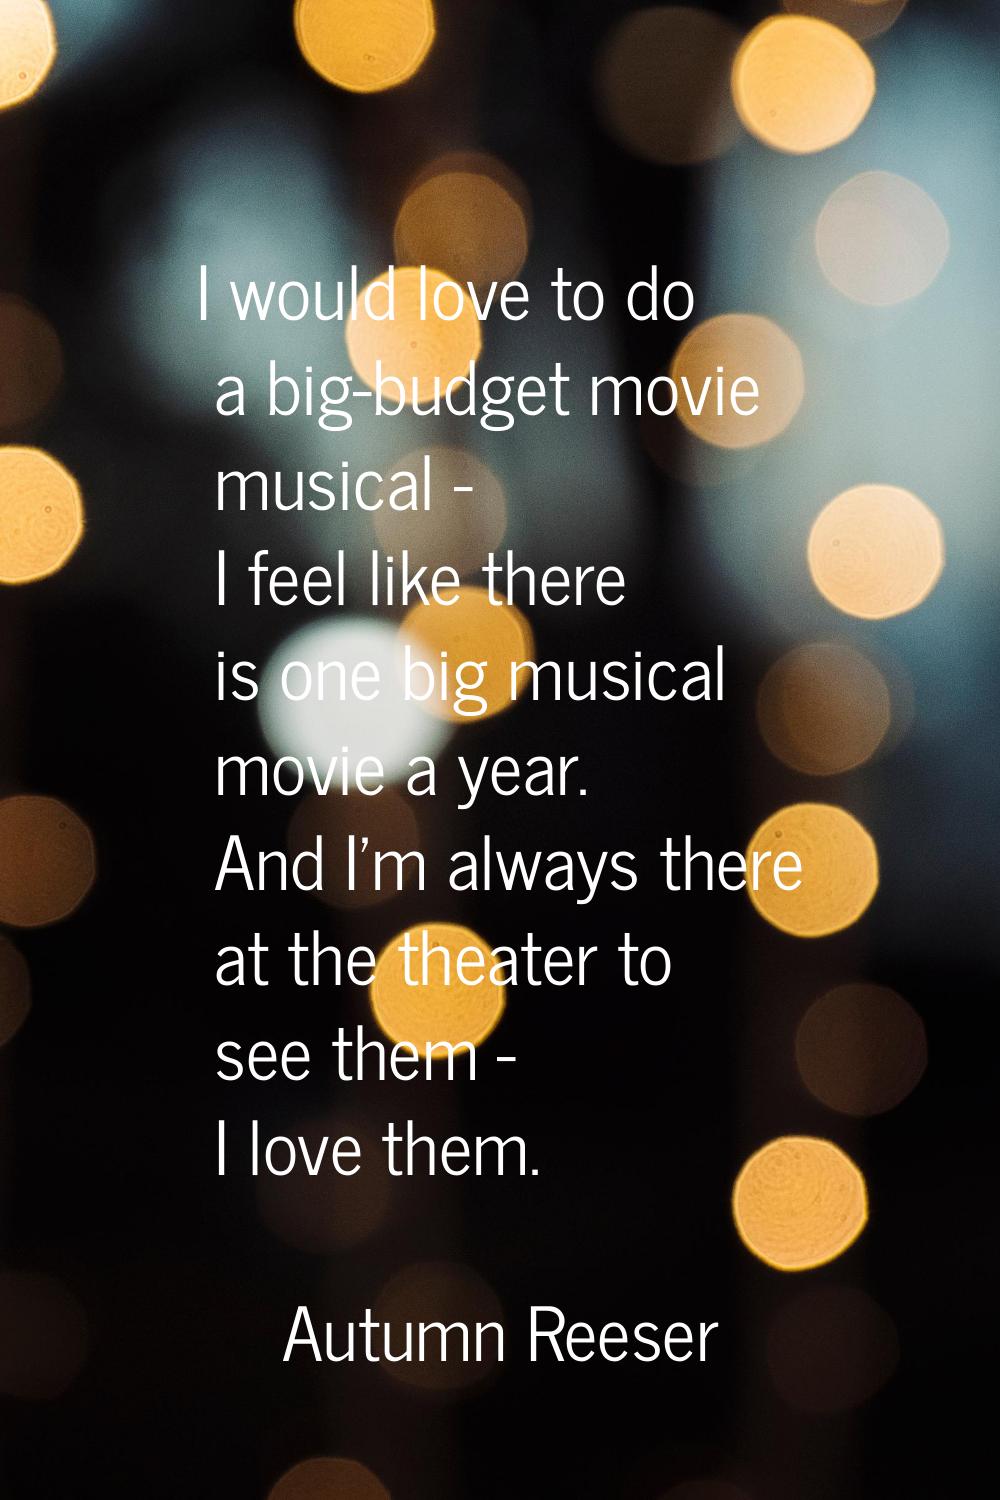 I would love to do a big-budget movie musical - I feel like there is one big musical movie a year. 